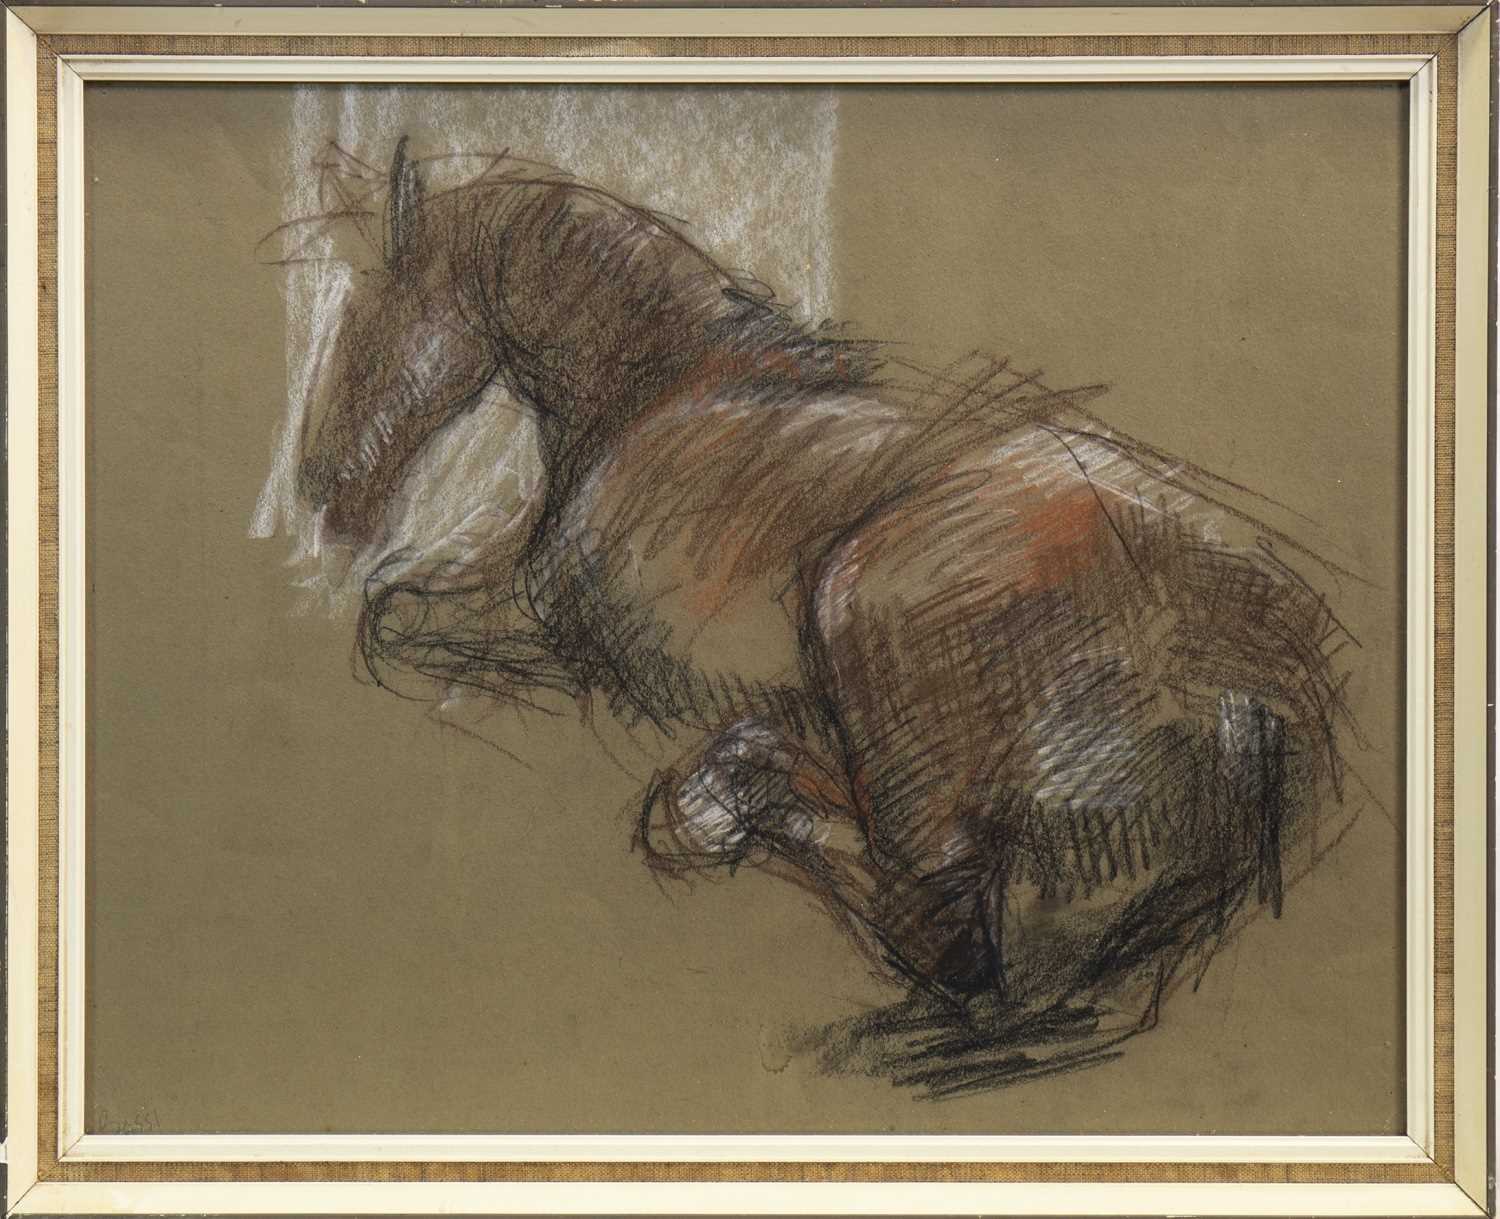 Lot 520 - SKETCH OF A HORSE, A PASTEL BY SOFIA BASSI